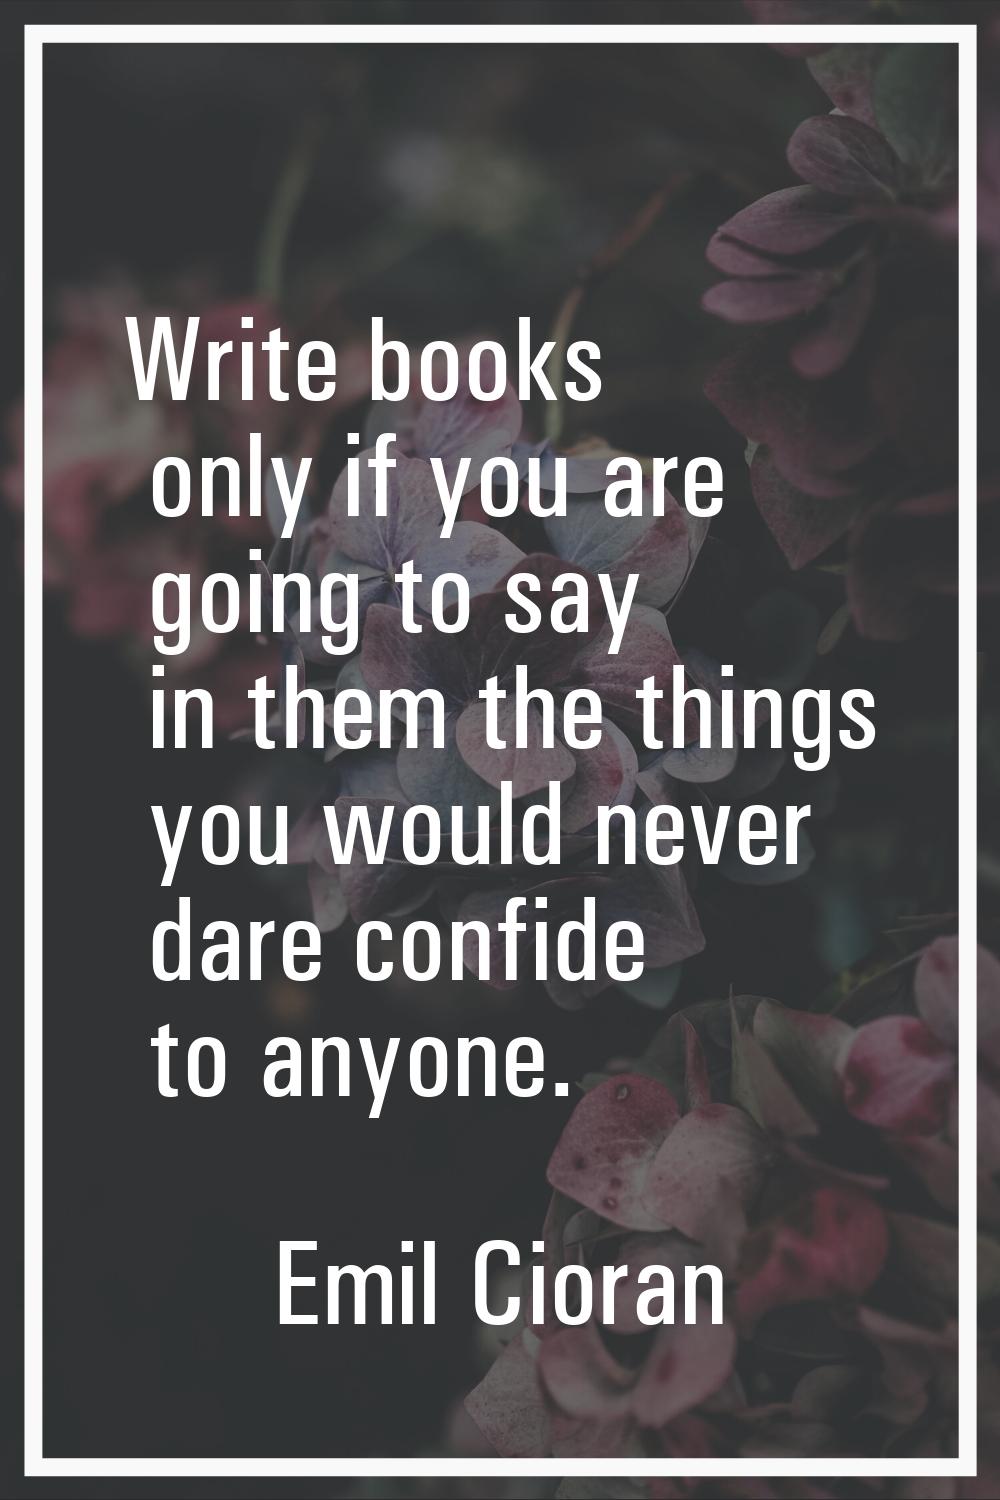 Write books only if you are going to say in them the things you would never dare confide to anyone.